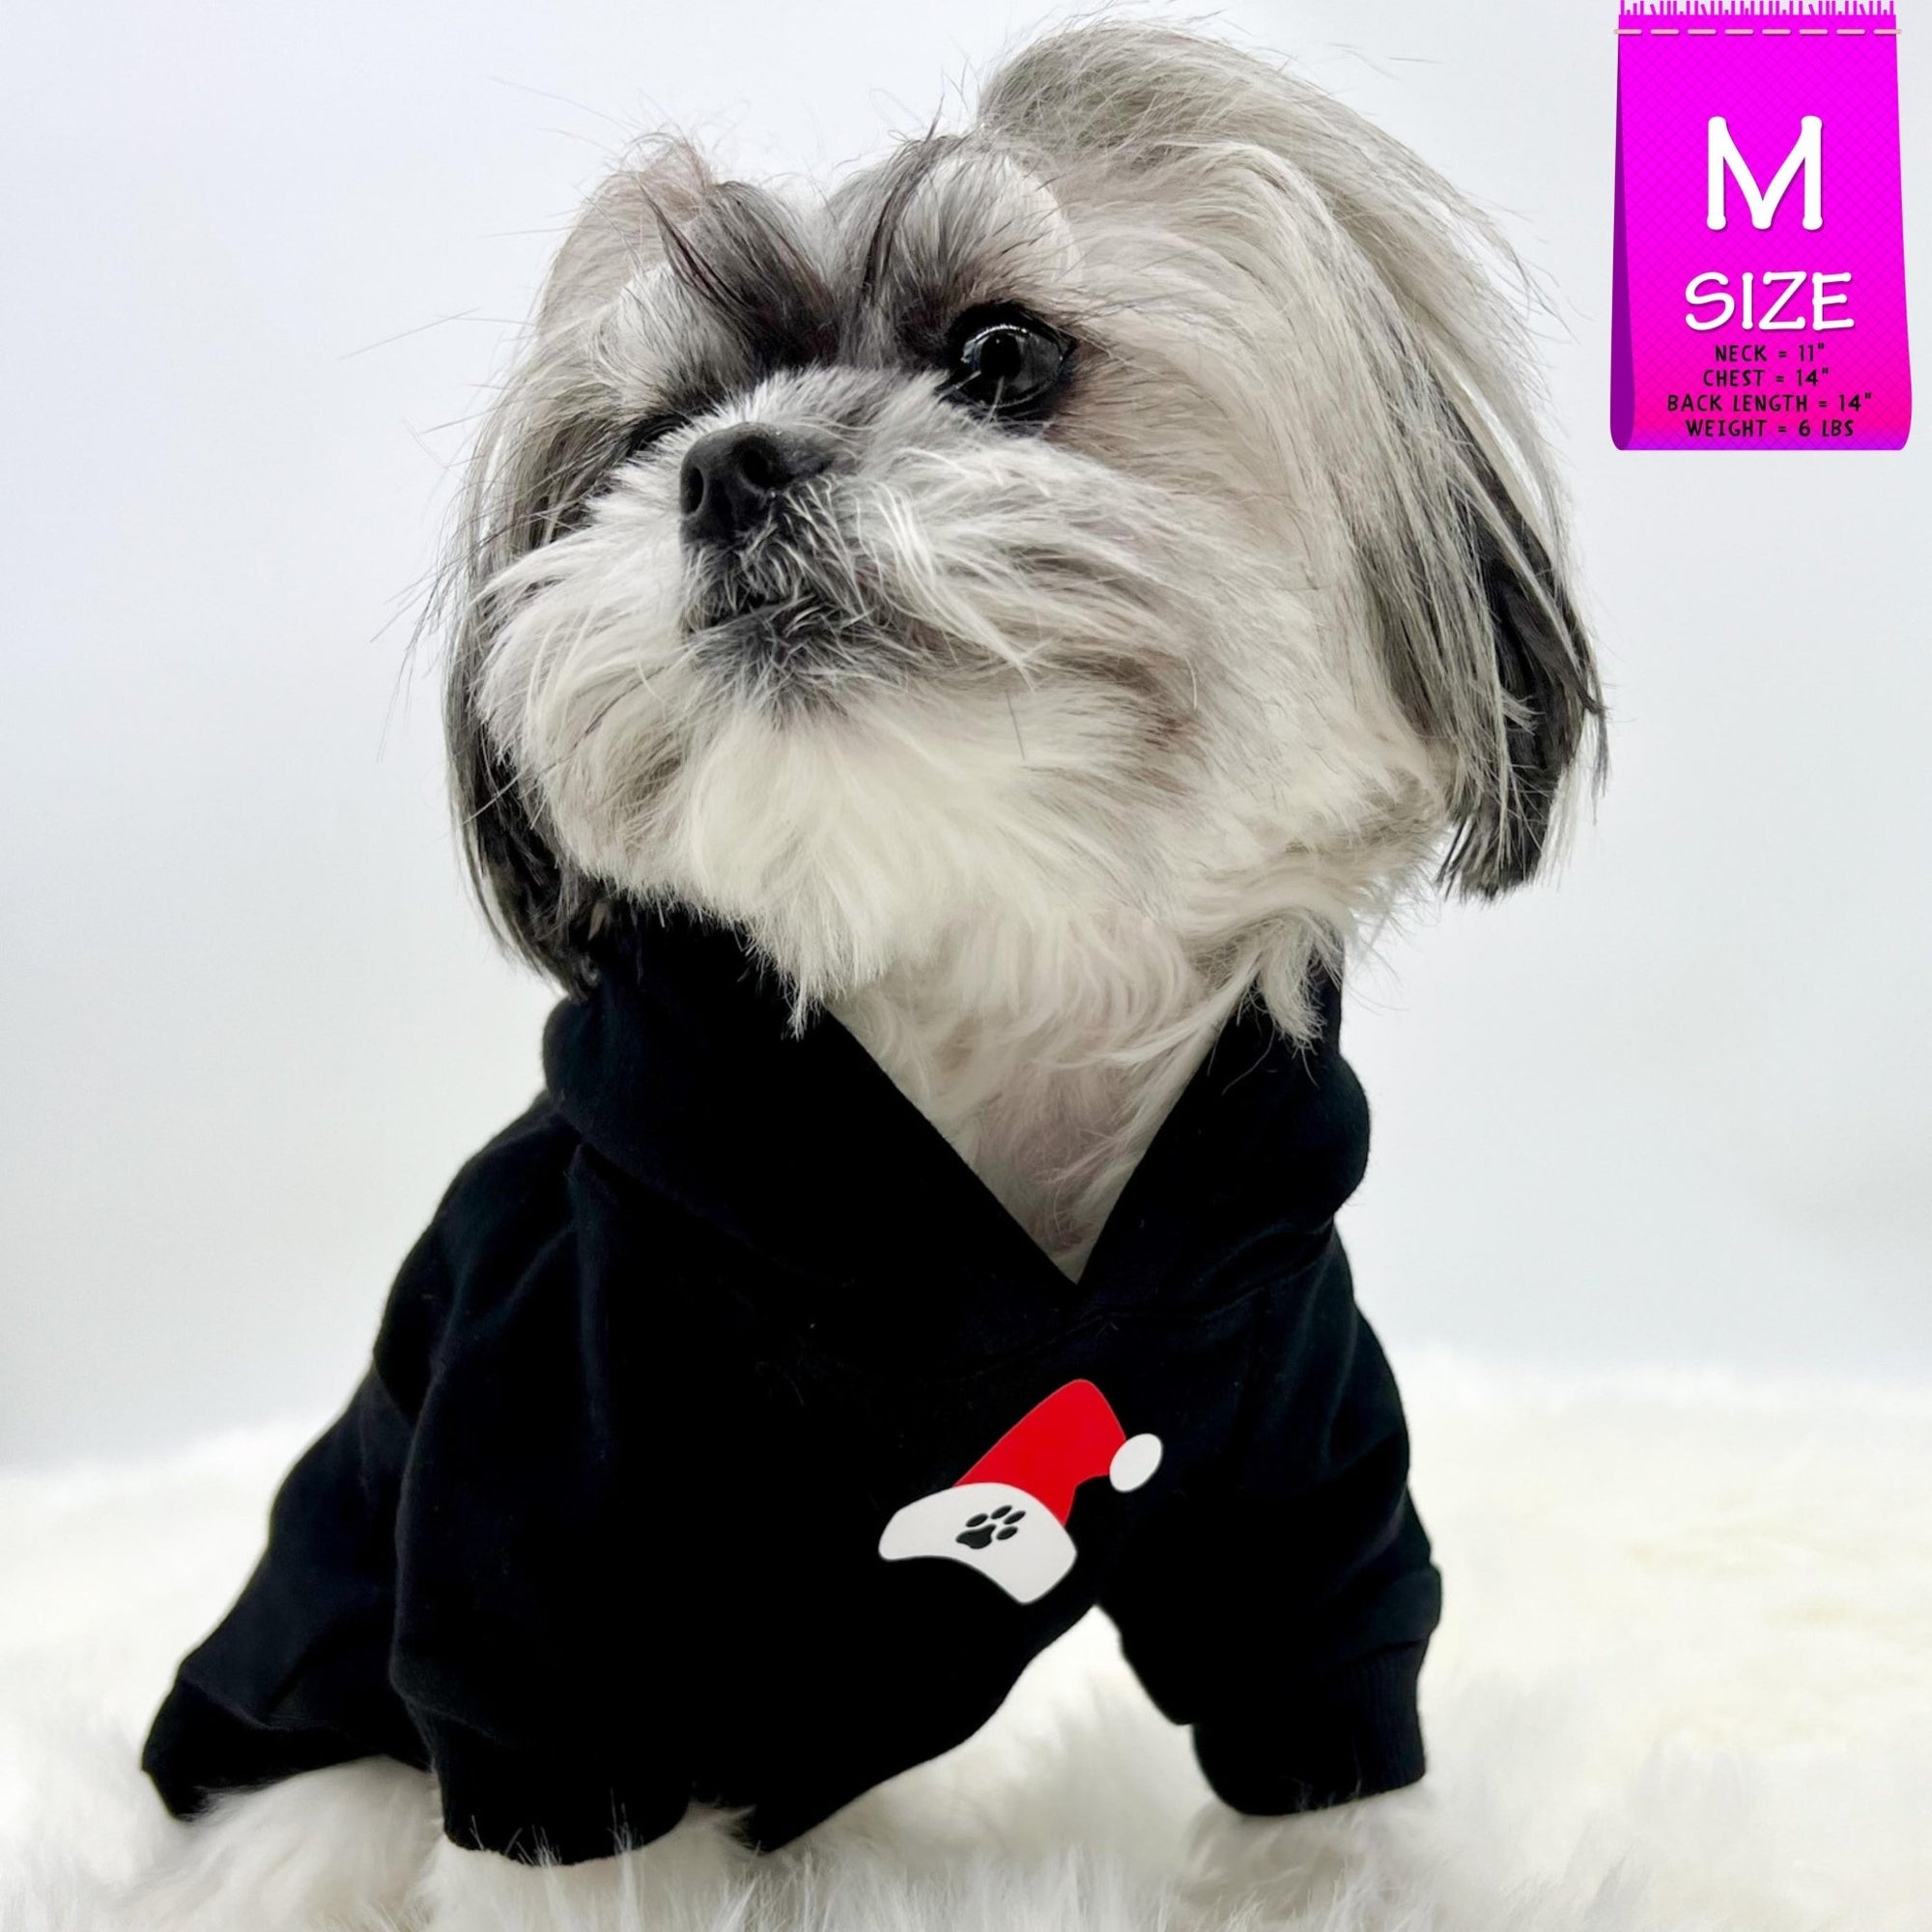 Dog Hoodie - Hoodies For Dogs - Shih Tzu wearing &quot;Santa Paws&quot; dog hoodie in black - front view with red and white santa hat emoji with black paw print - against solid white background - Wag Trendz